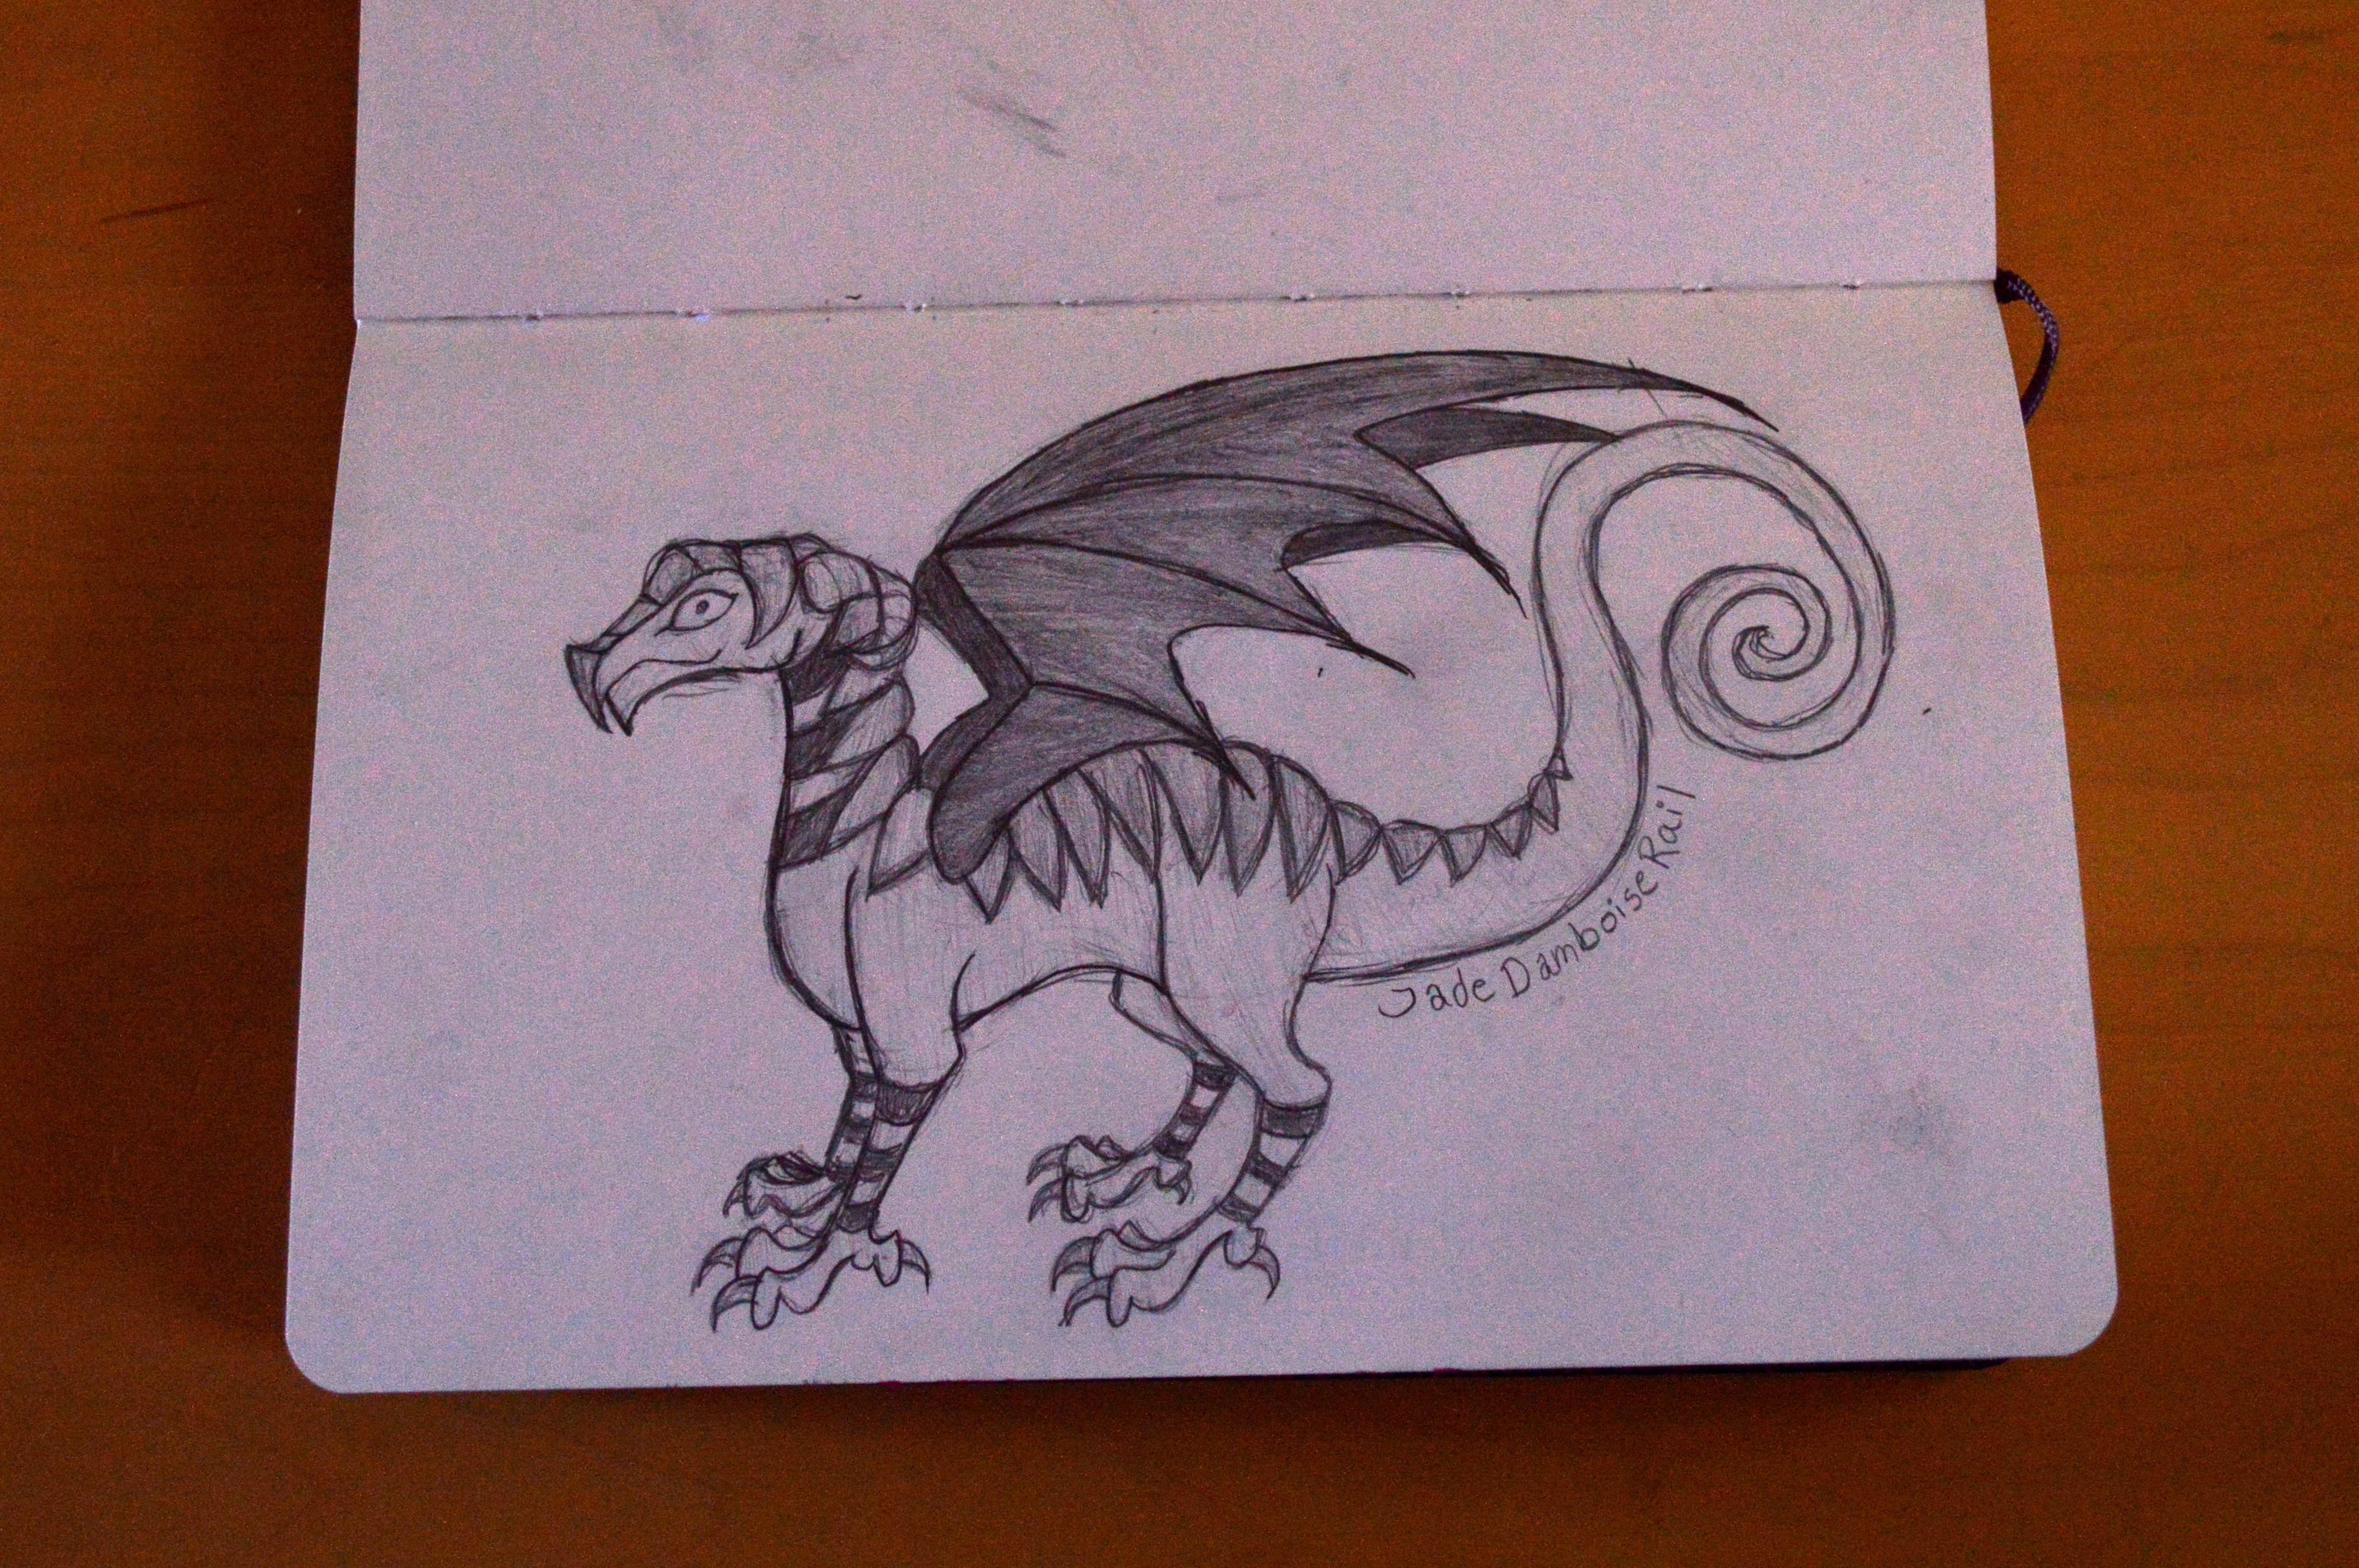 Sketch of a creepy smiling dragon from the side